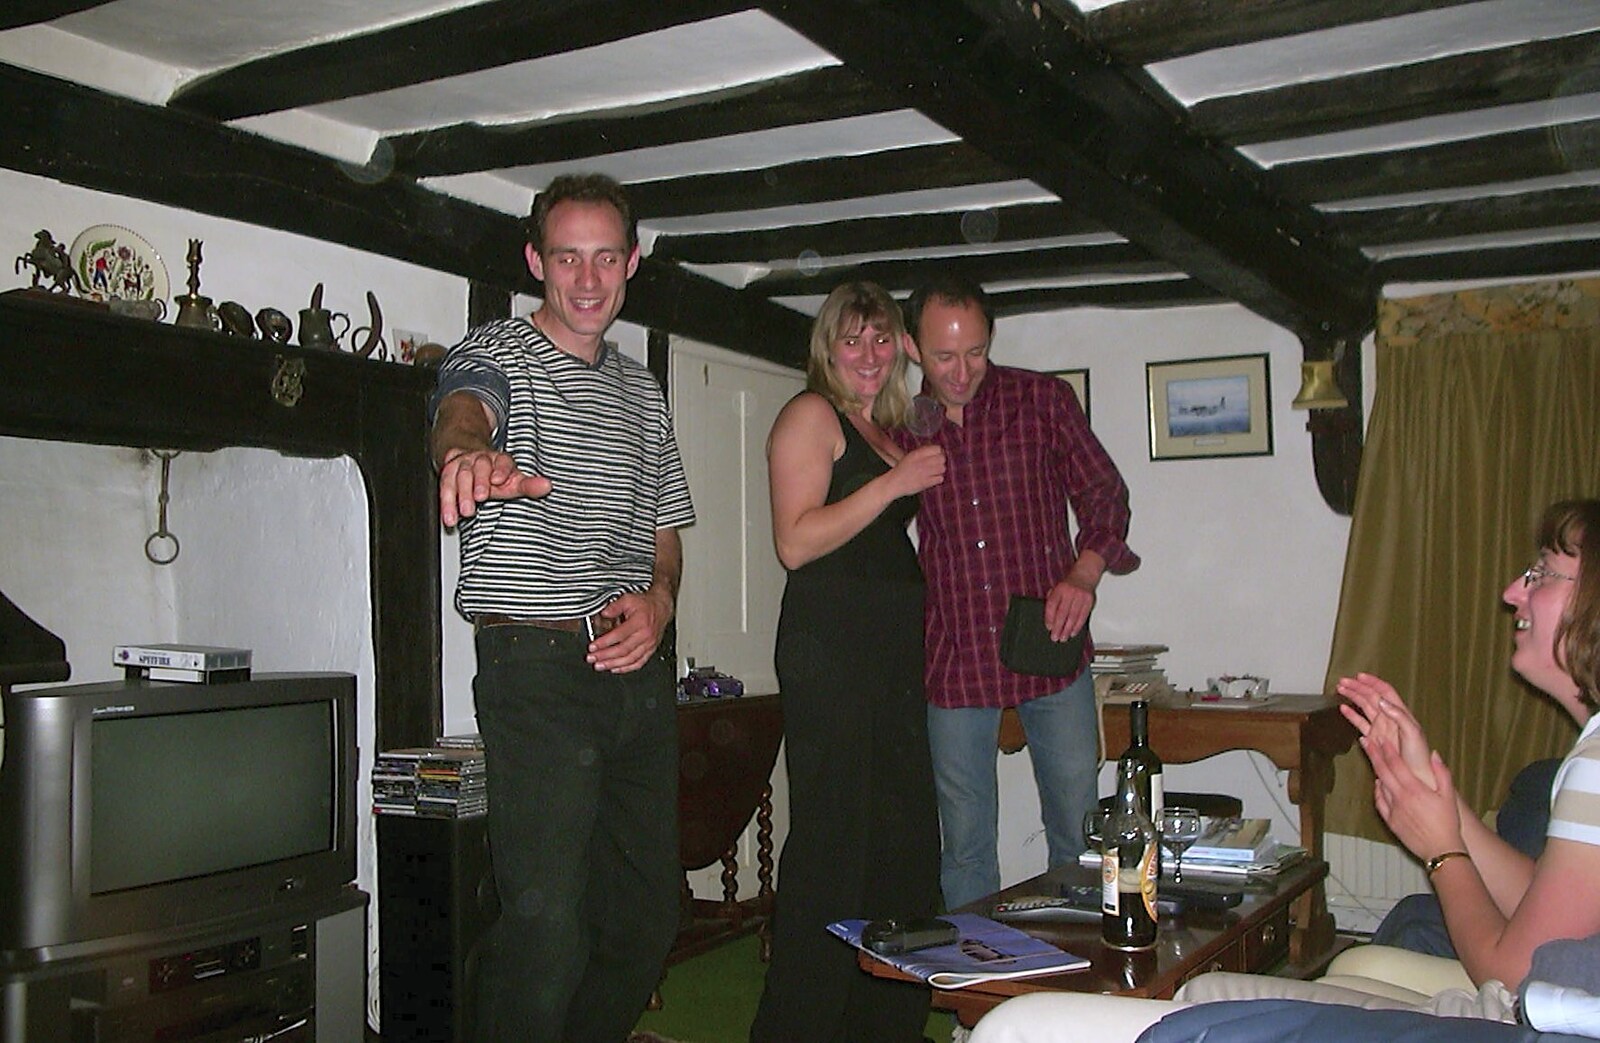 All round to DH's lounge from Golden Jubilee Celebrations, The Village Hall, Brome, Suffolk - 4th June 2002